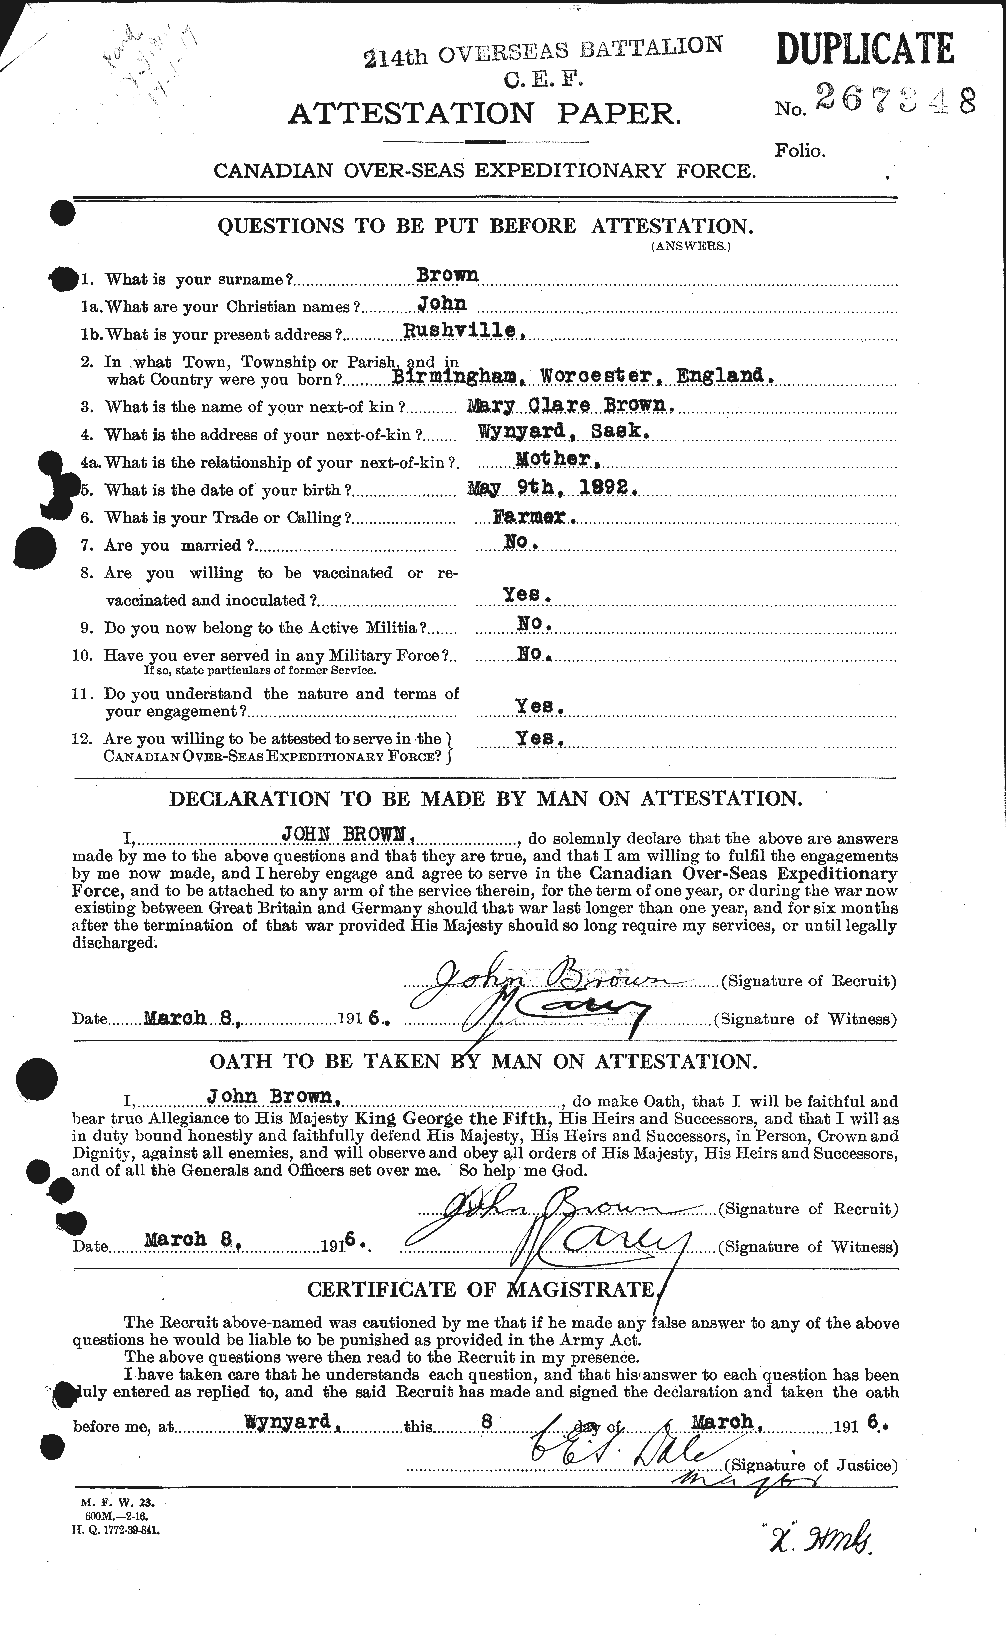 Personnel Records of the First World War - CEF 263927a